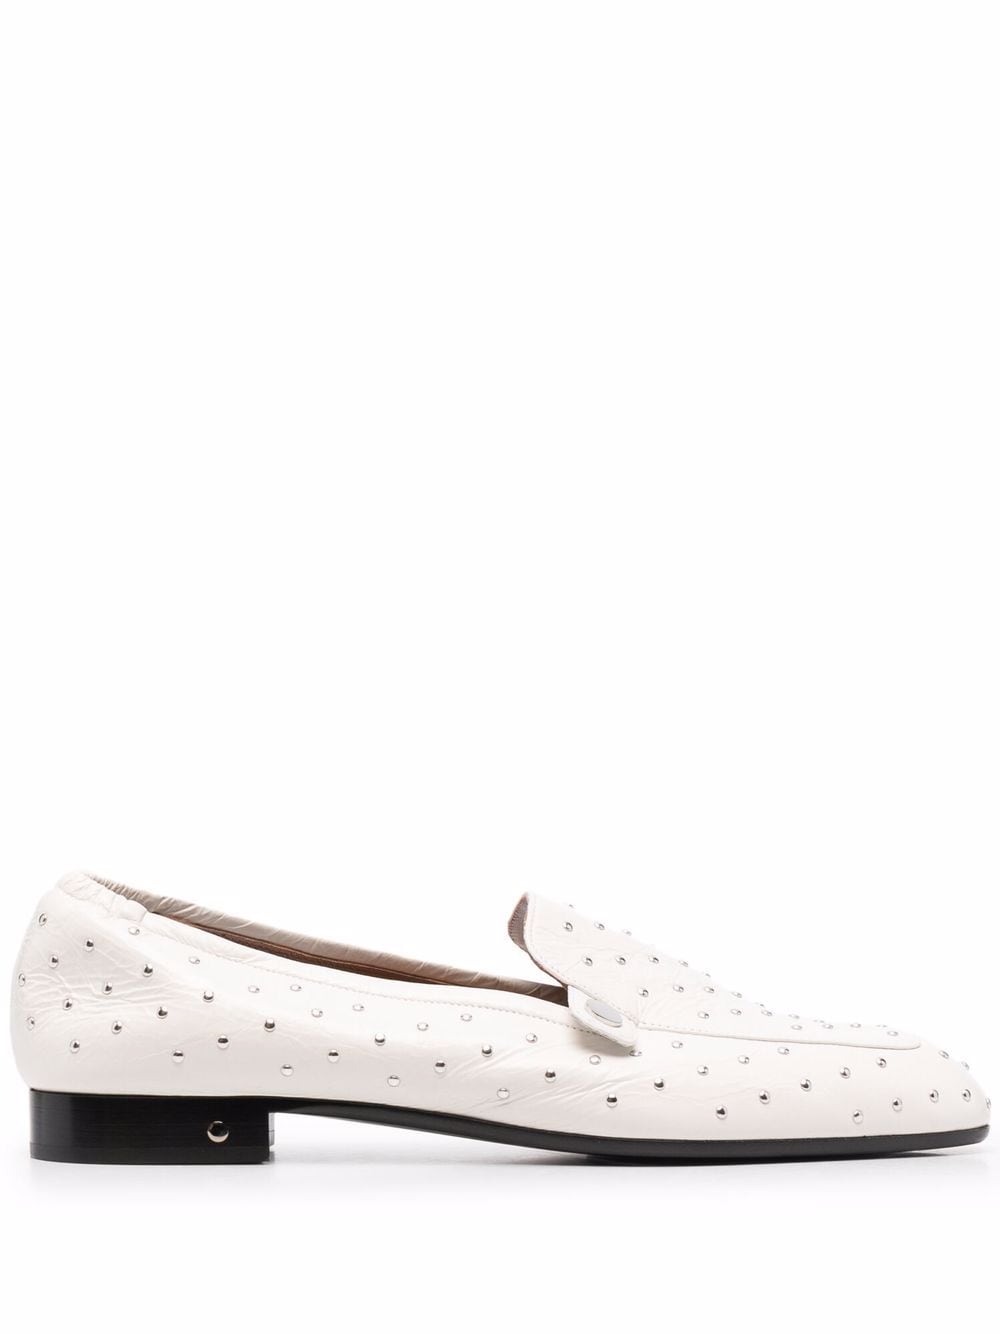 Laurence Dacade Angela leather loafers - White von Laurence Dacade